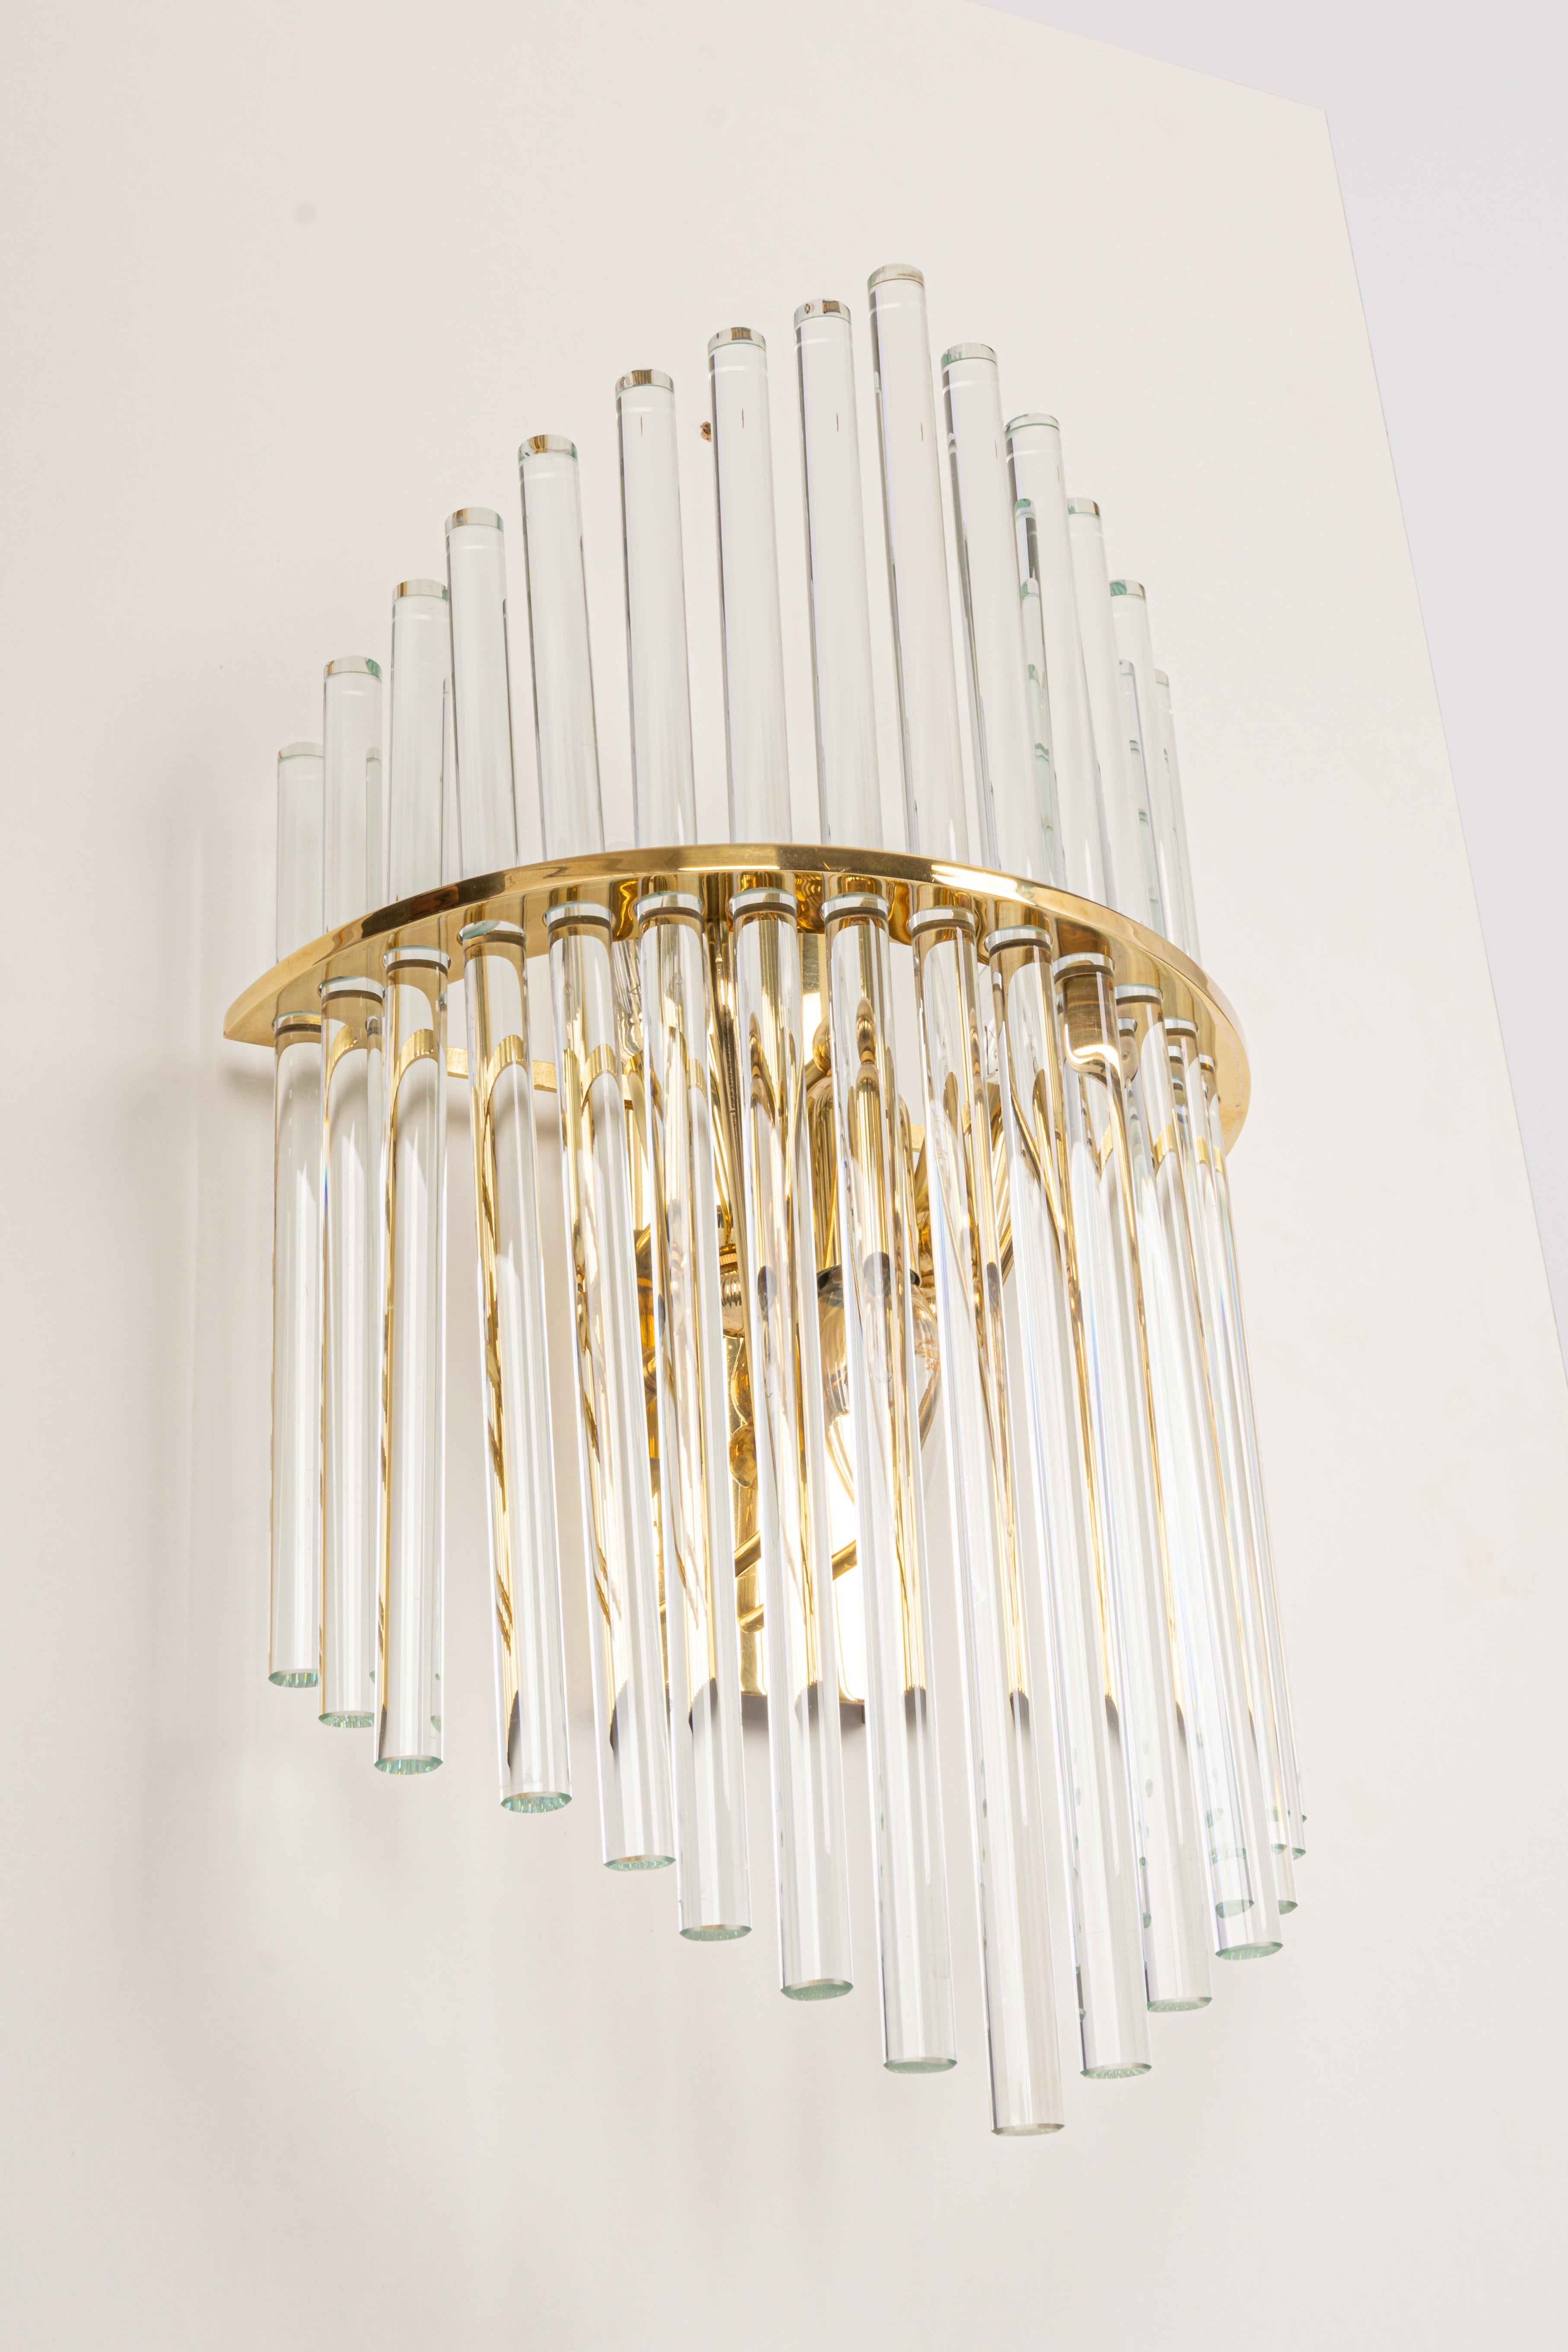 Brass 1 of 3 Pairs of Wonderful Crystal Rod Sconces by Christoph Palme, Germany, 1970s For Sale